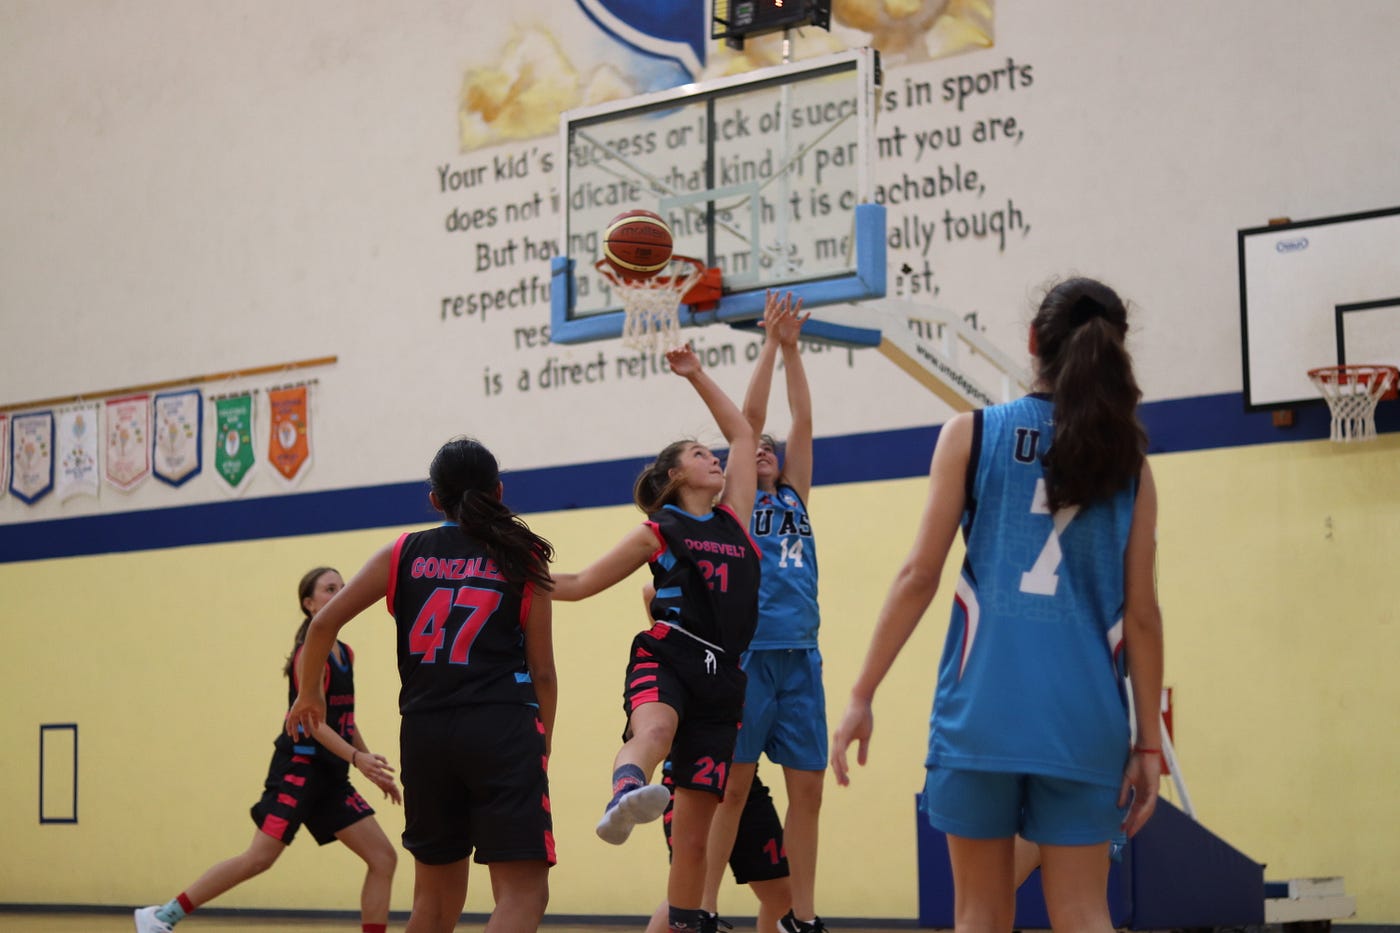 New National Report Sheds Light on Girls' Sports Participation